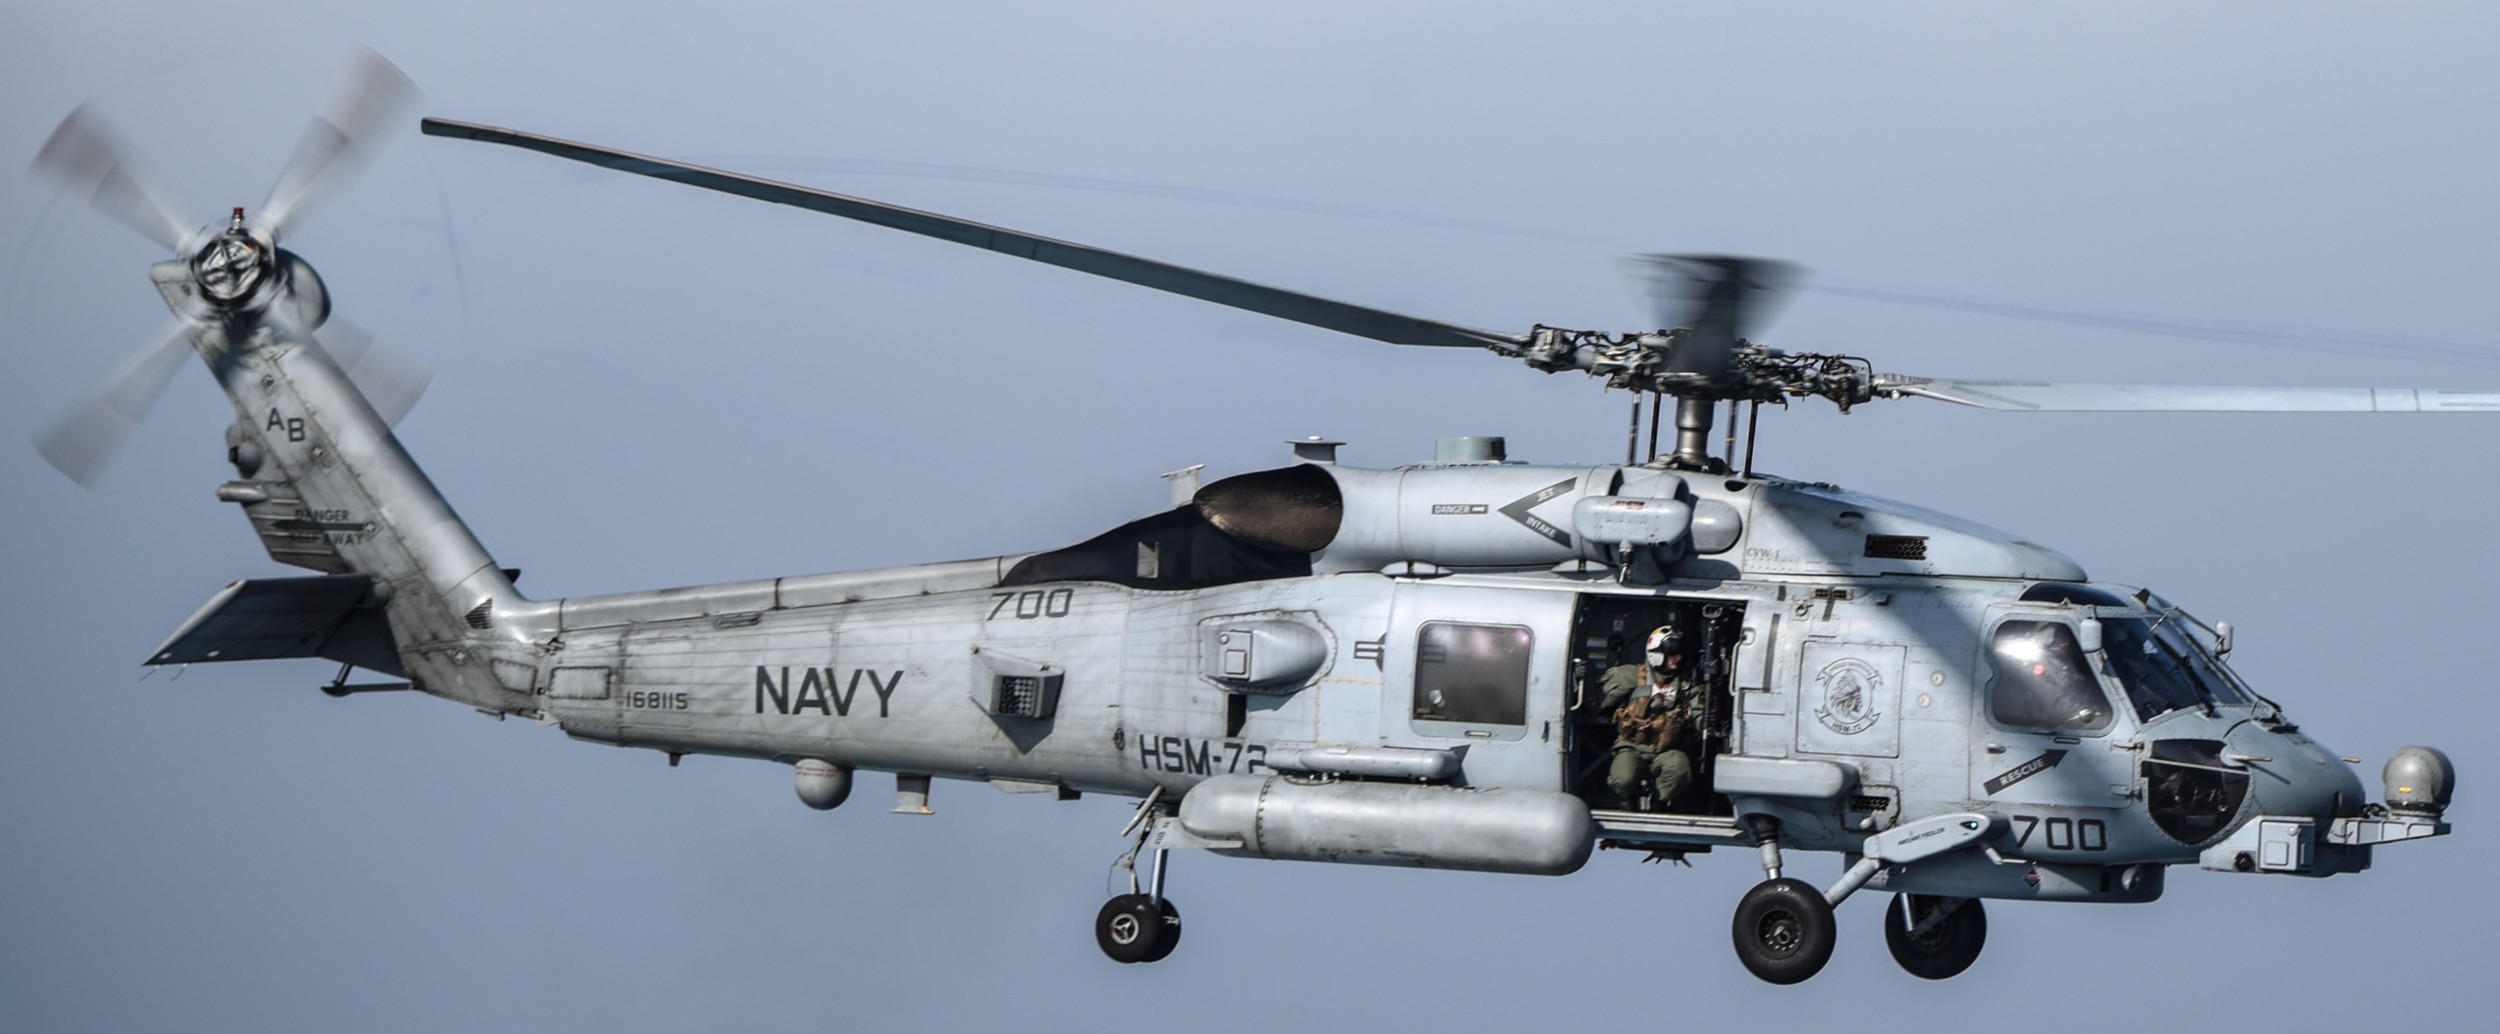 hsm-72 proud warriors helicopter maritime strike squadron us navy mh-60r seahawk 2016 16